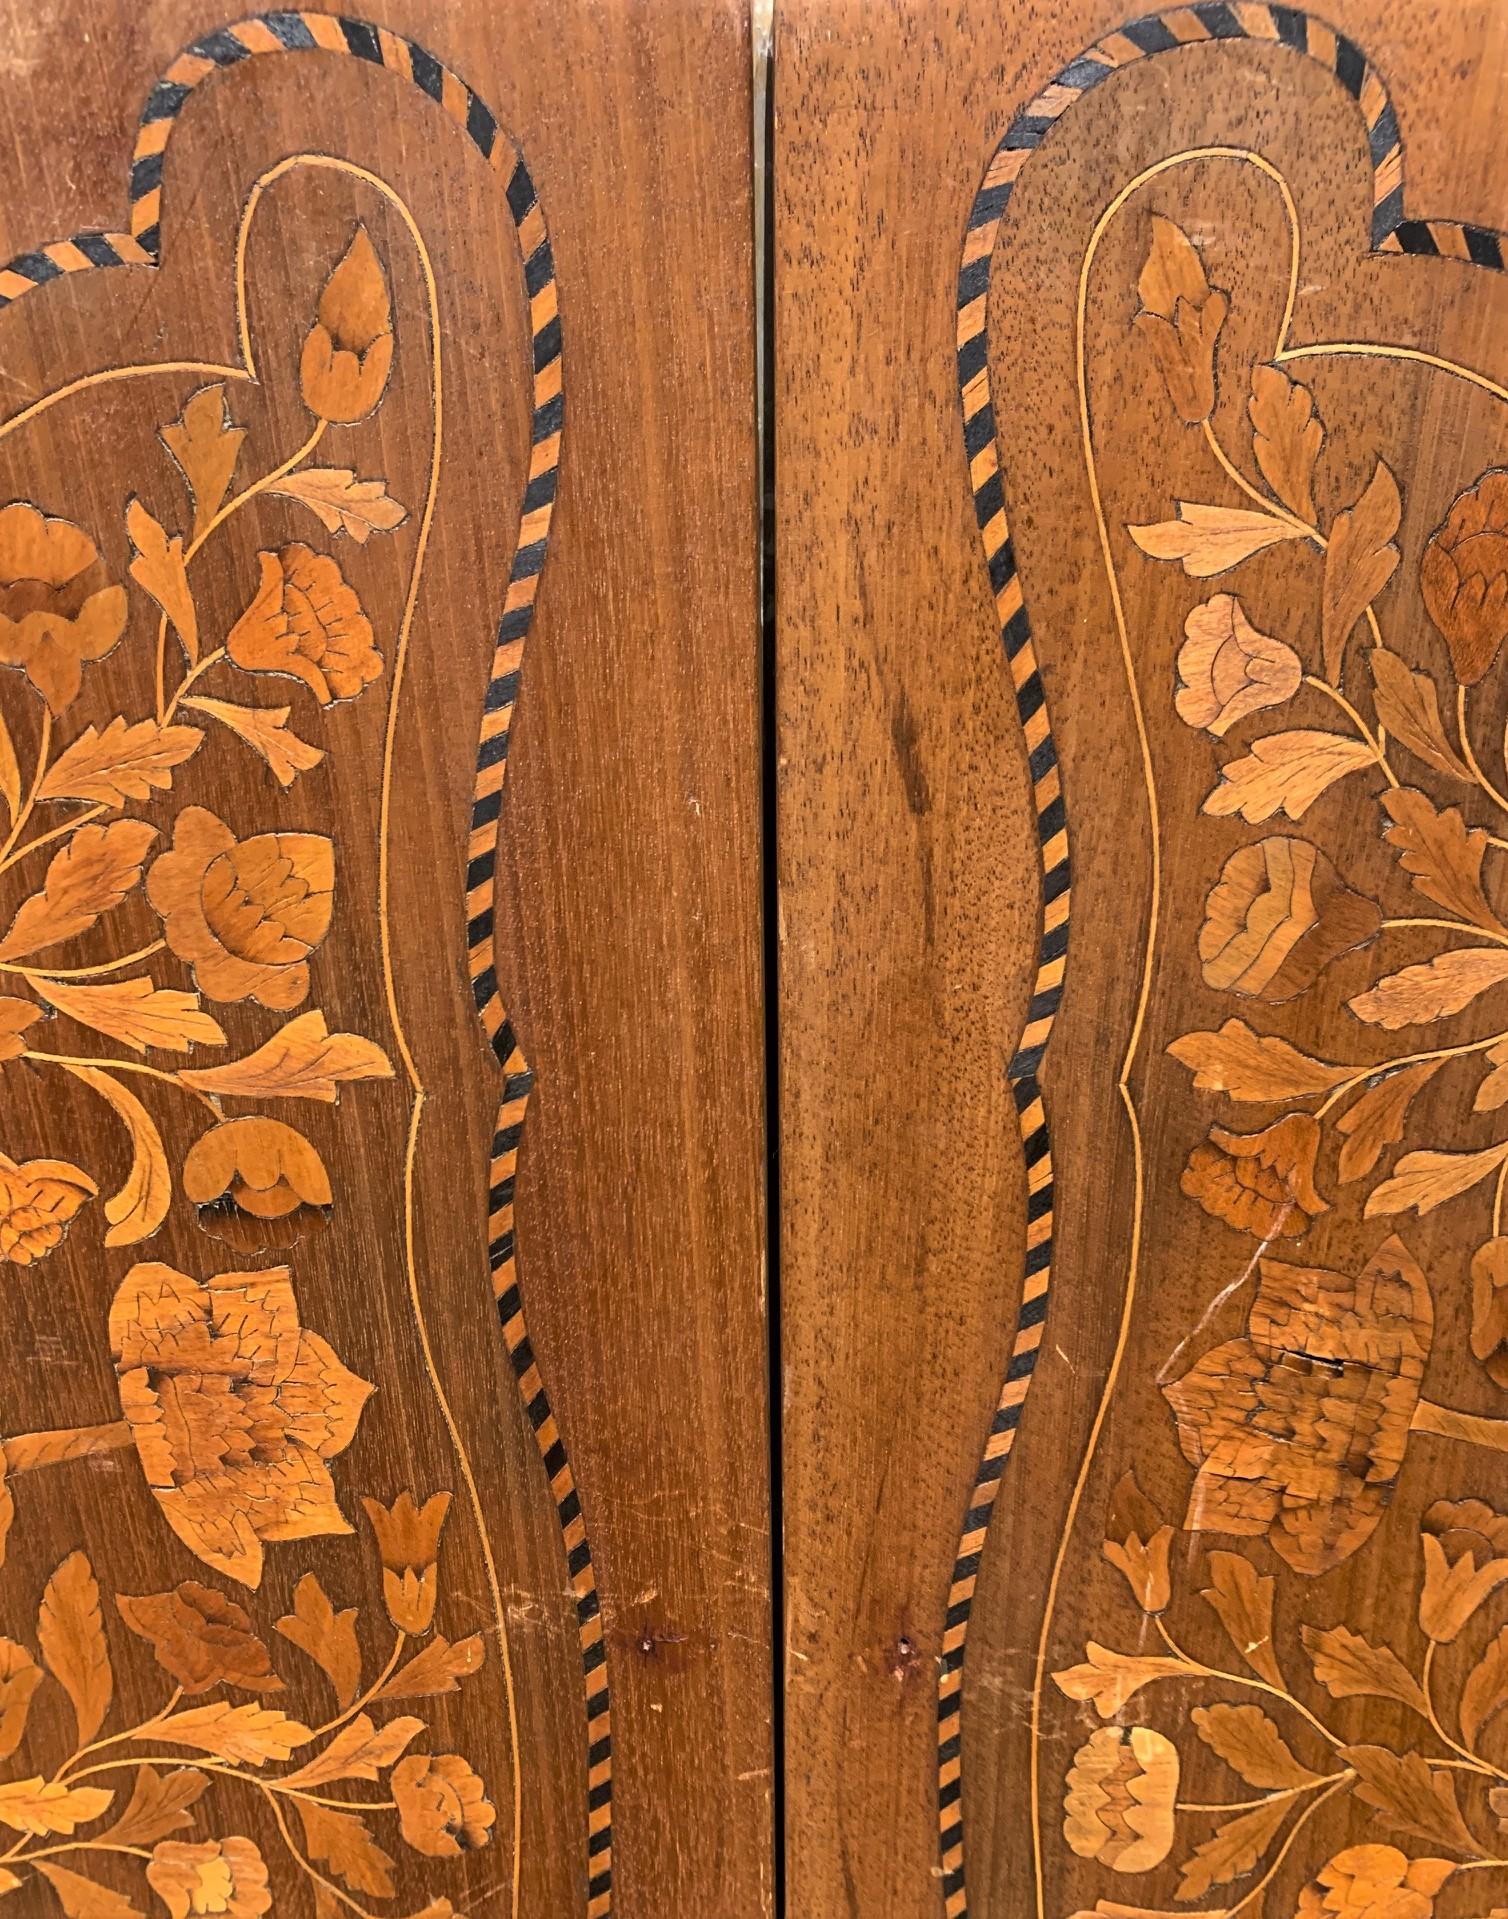 Inlay 19th Century Pair of Dutch Walnut Marquetry Inlaid Wall Panels